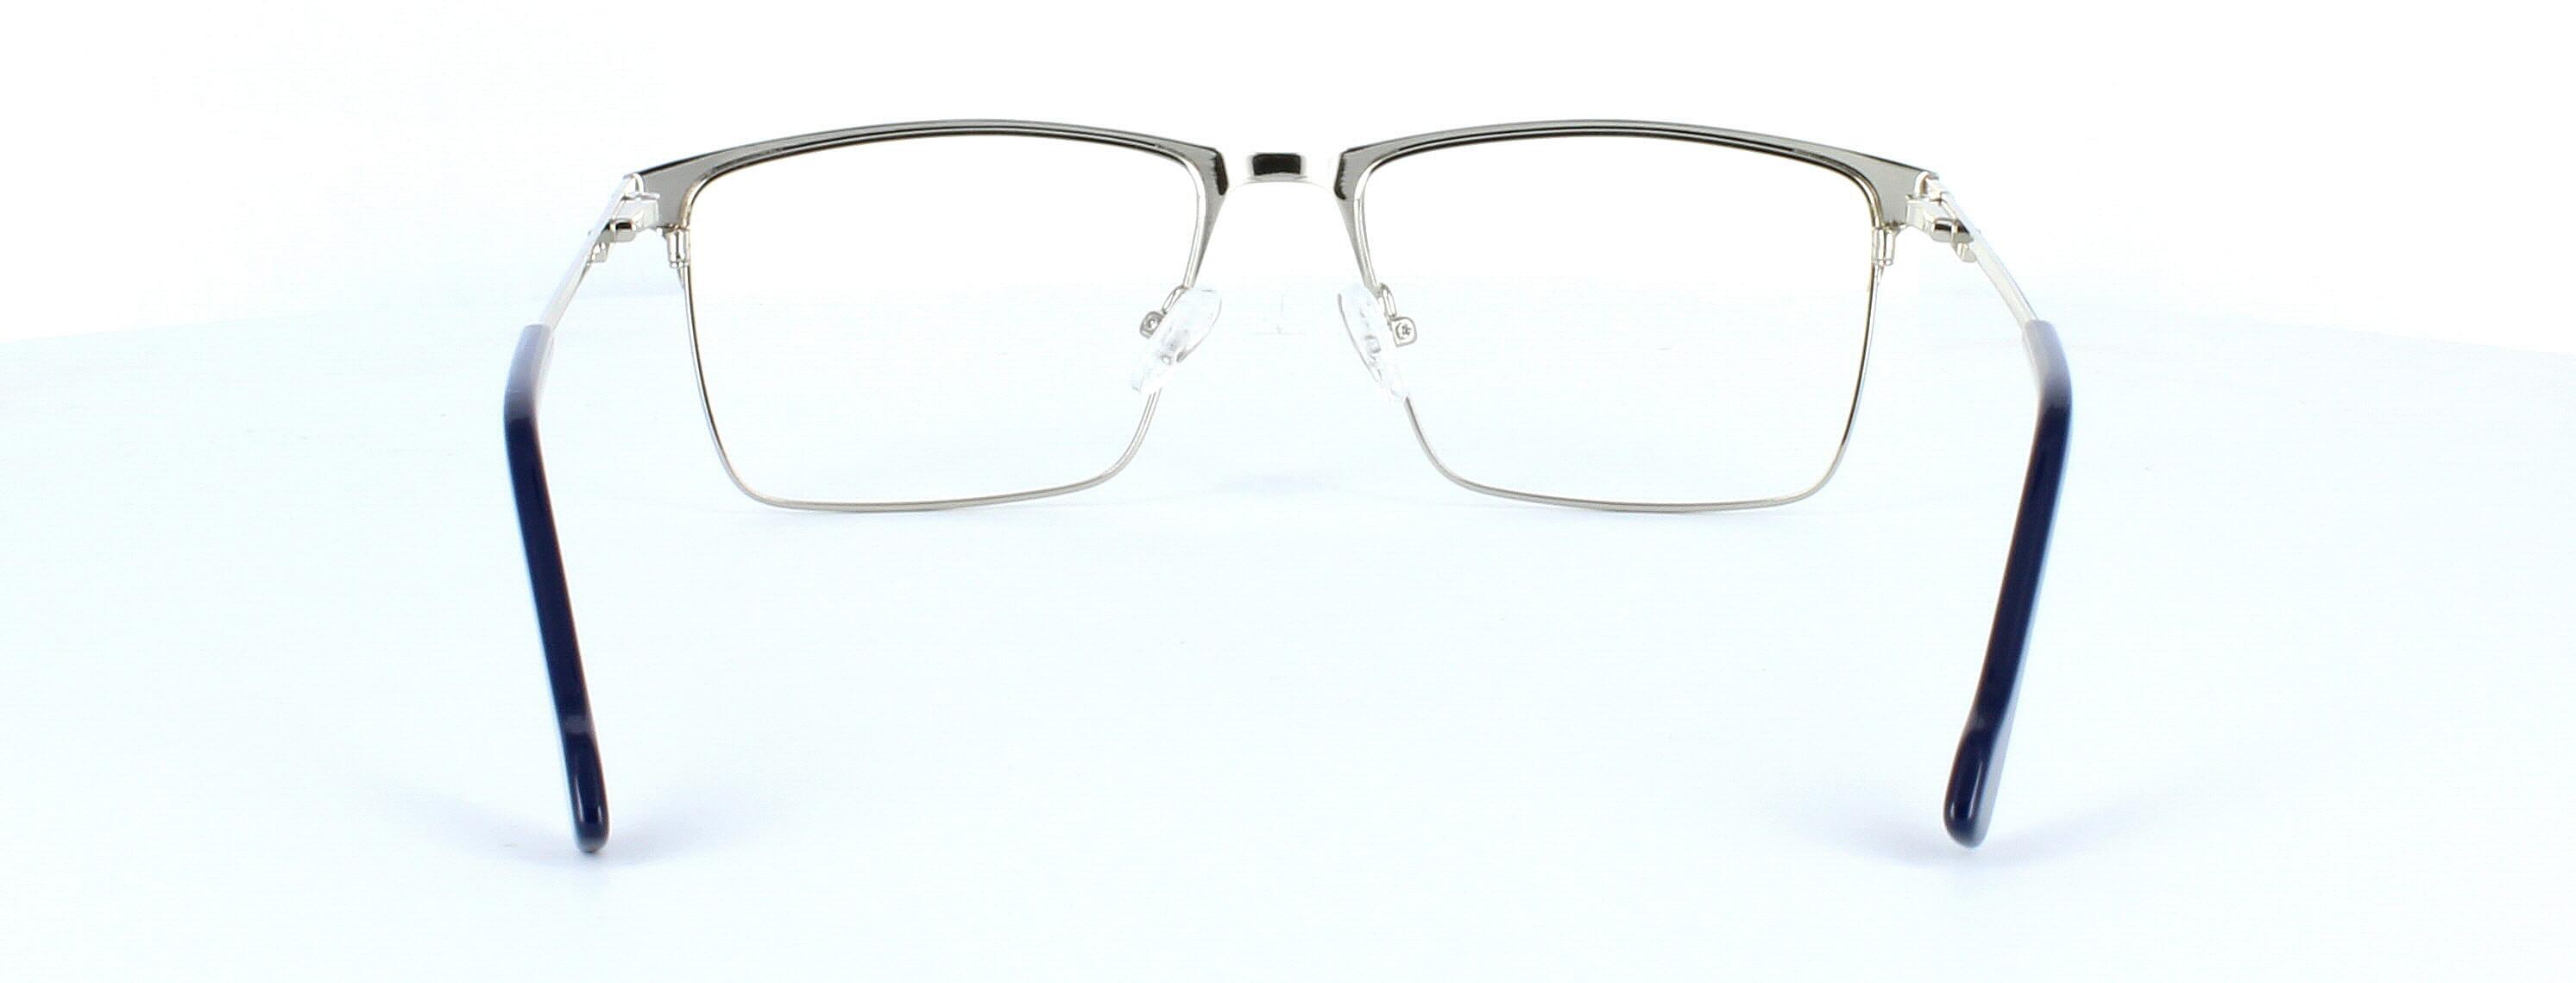 Warminster - blue & silver gent's glasses frame with rectangular shaped lenses - image view 3